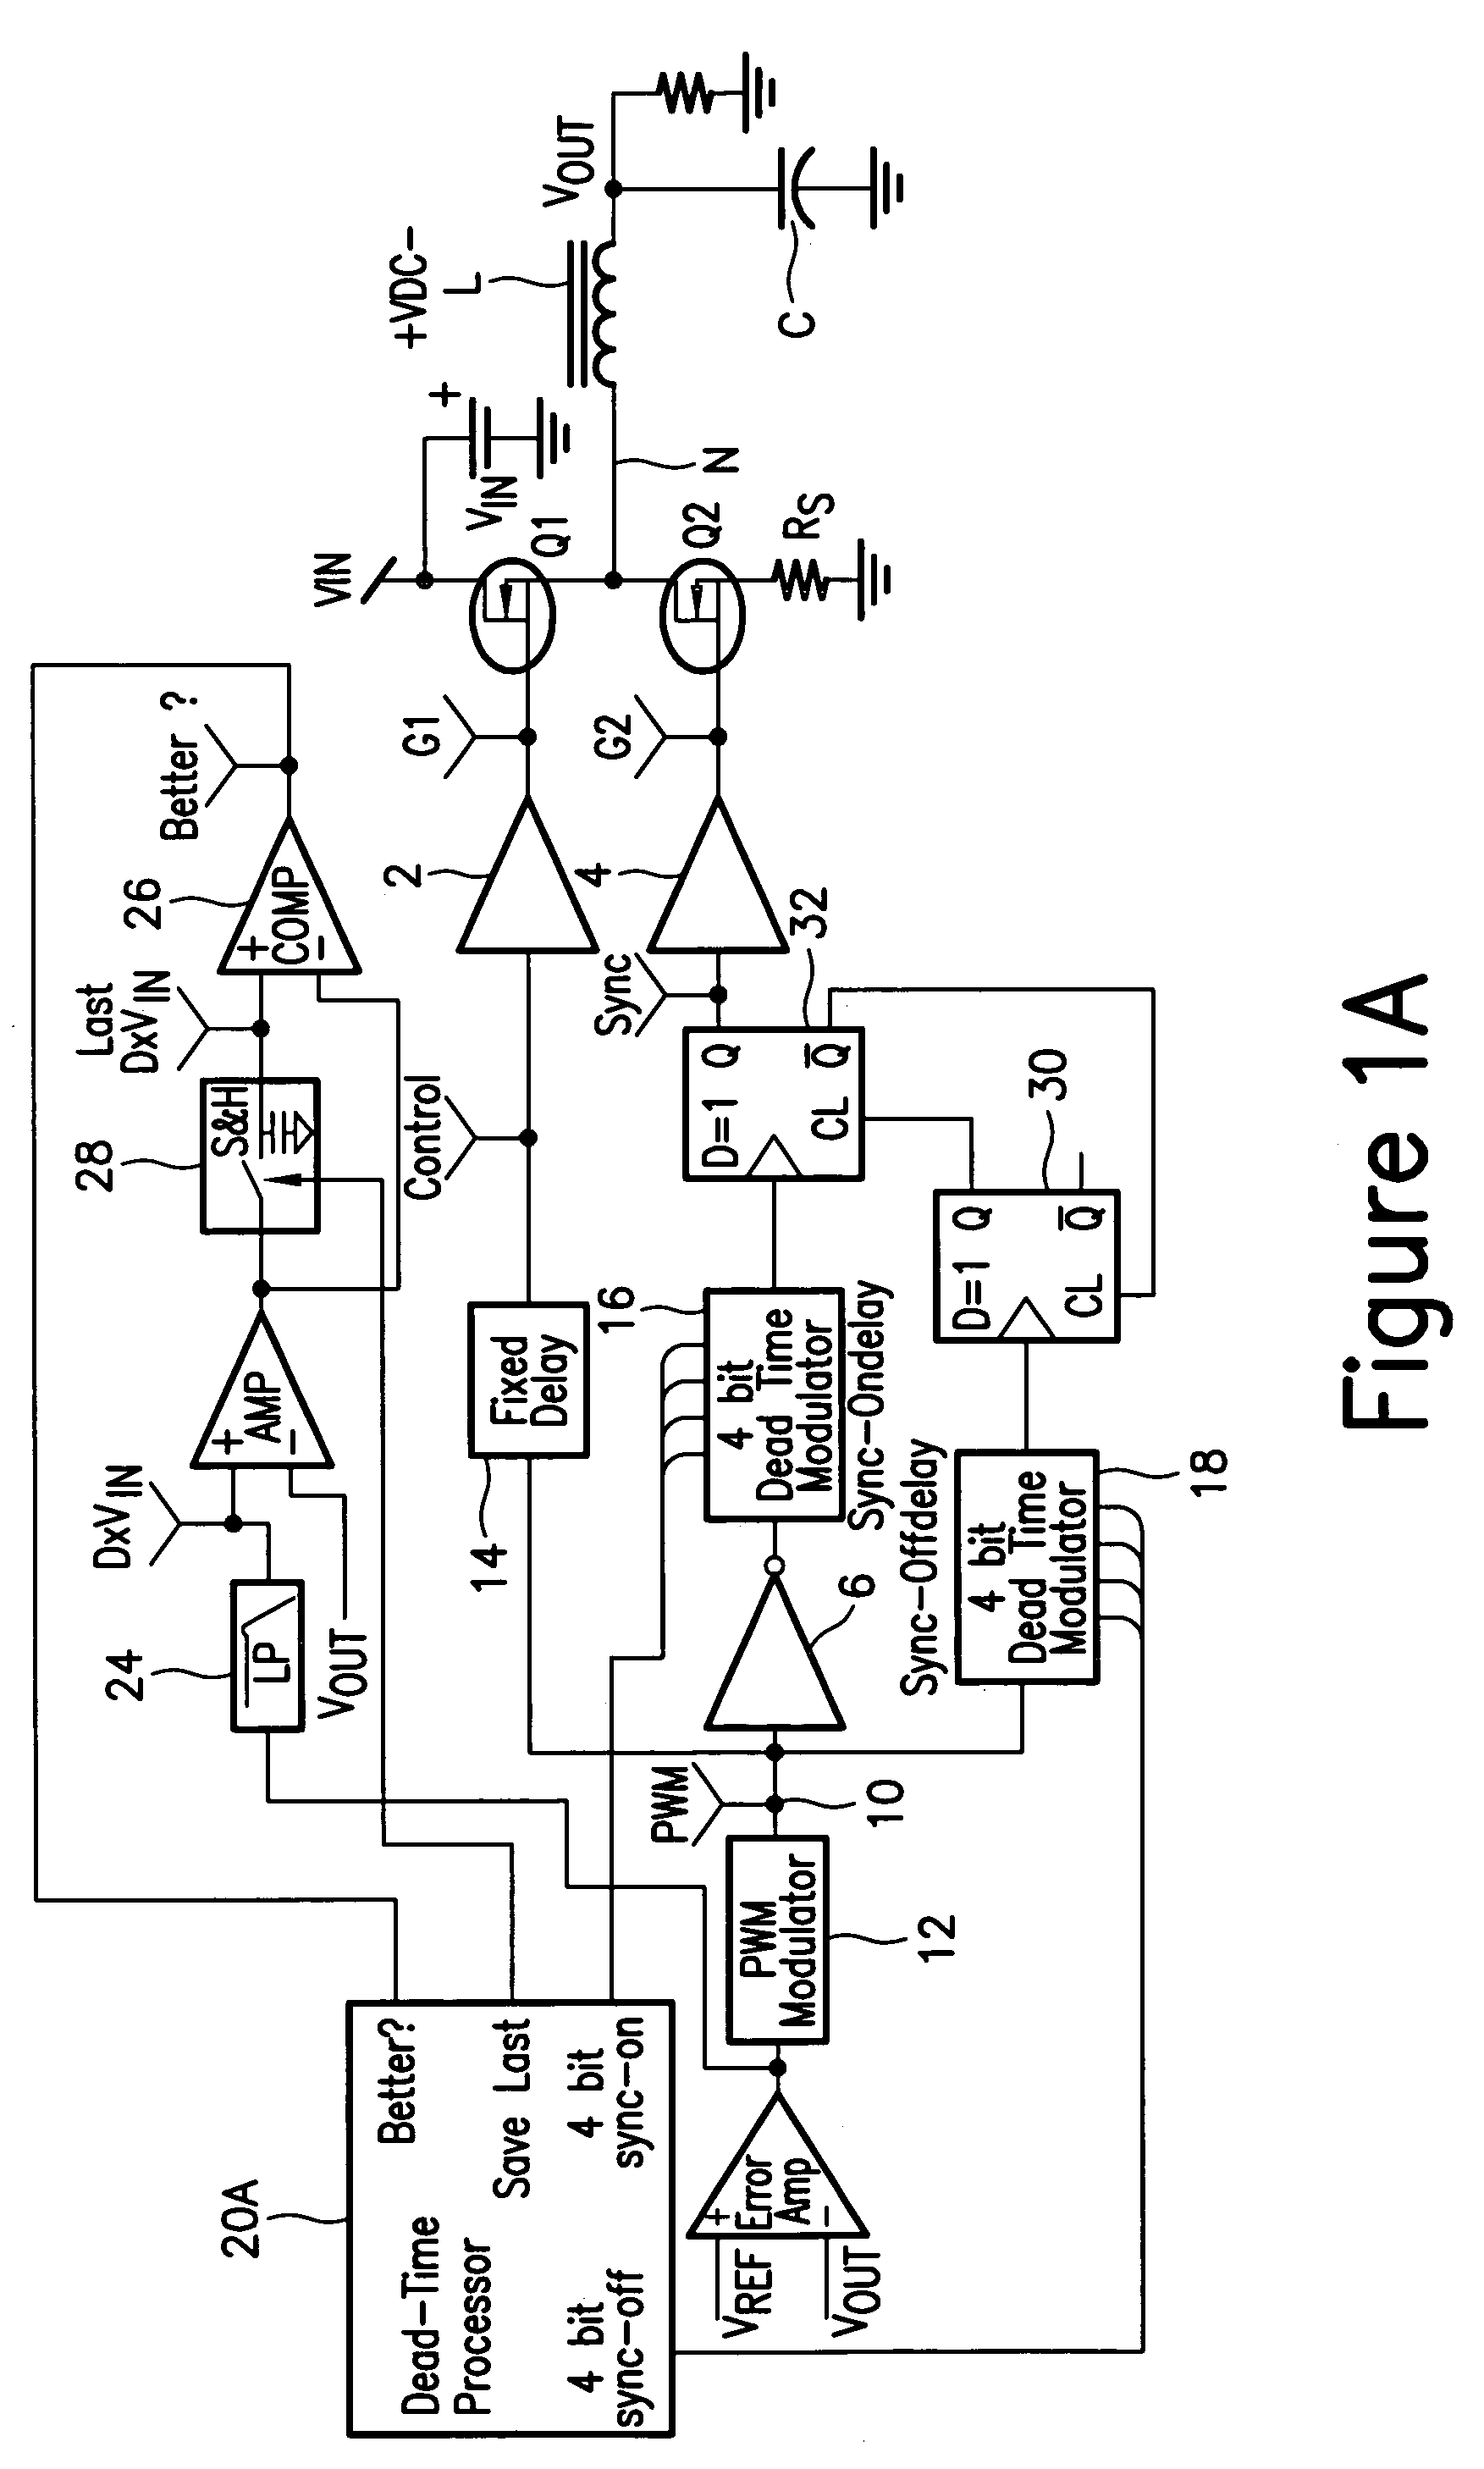 Method and apparatus for intelligently setting dead time